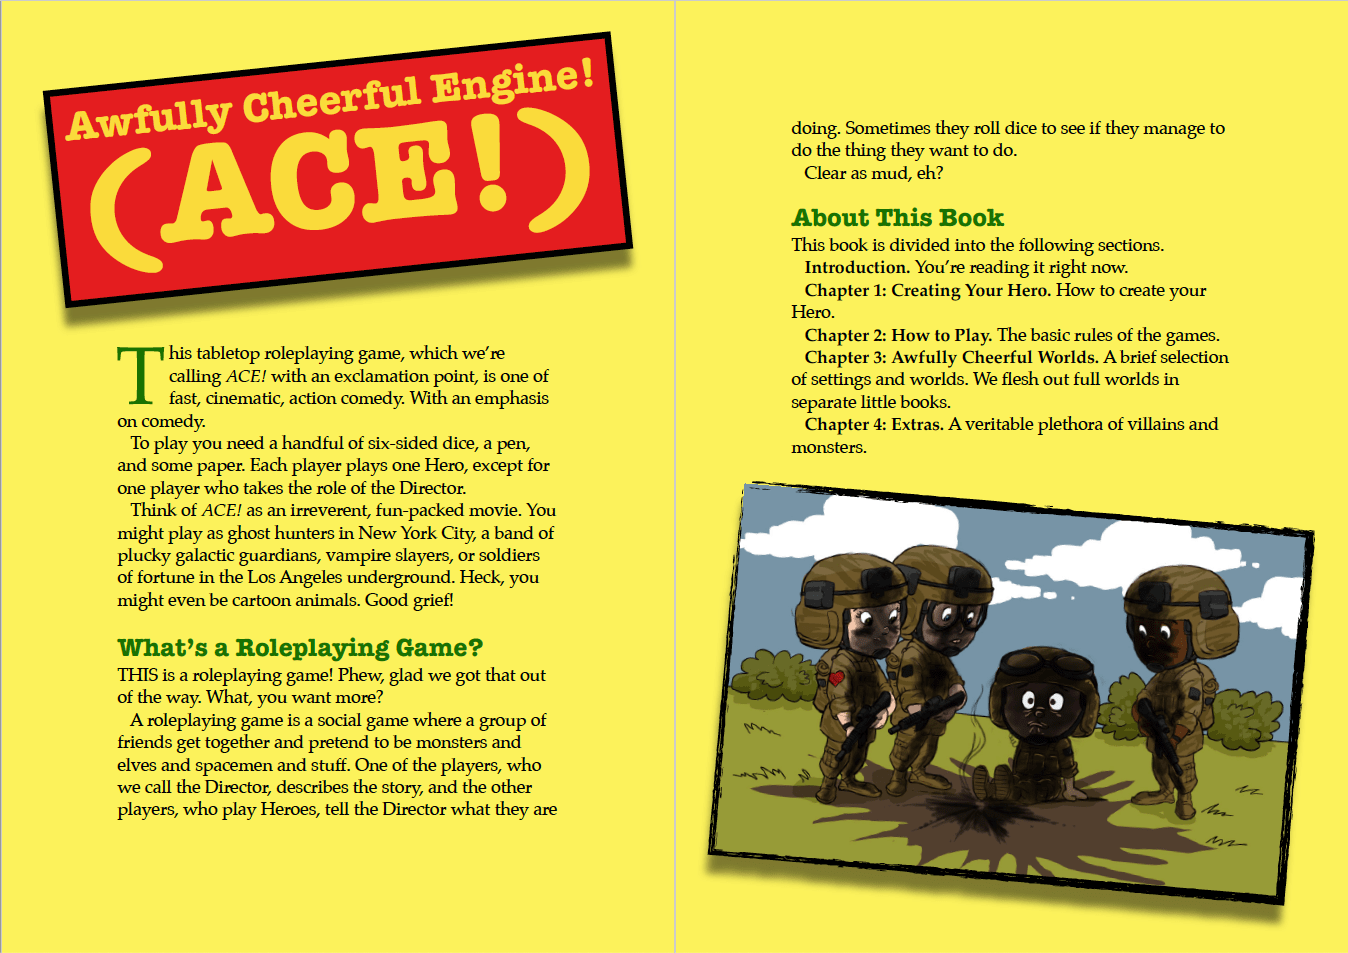 Awfully Cheerful Engine! (ACE)